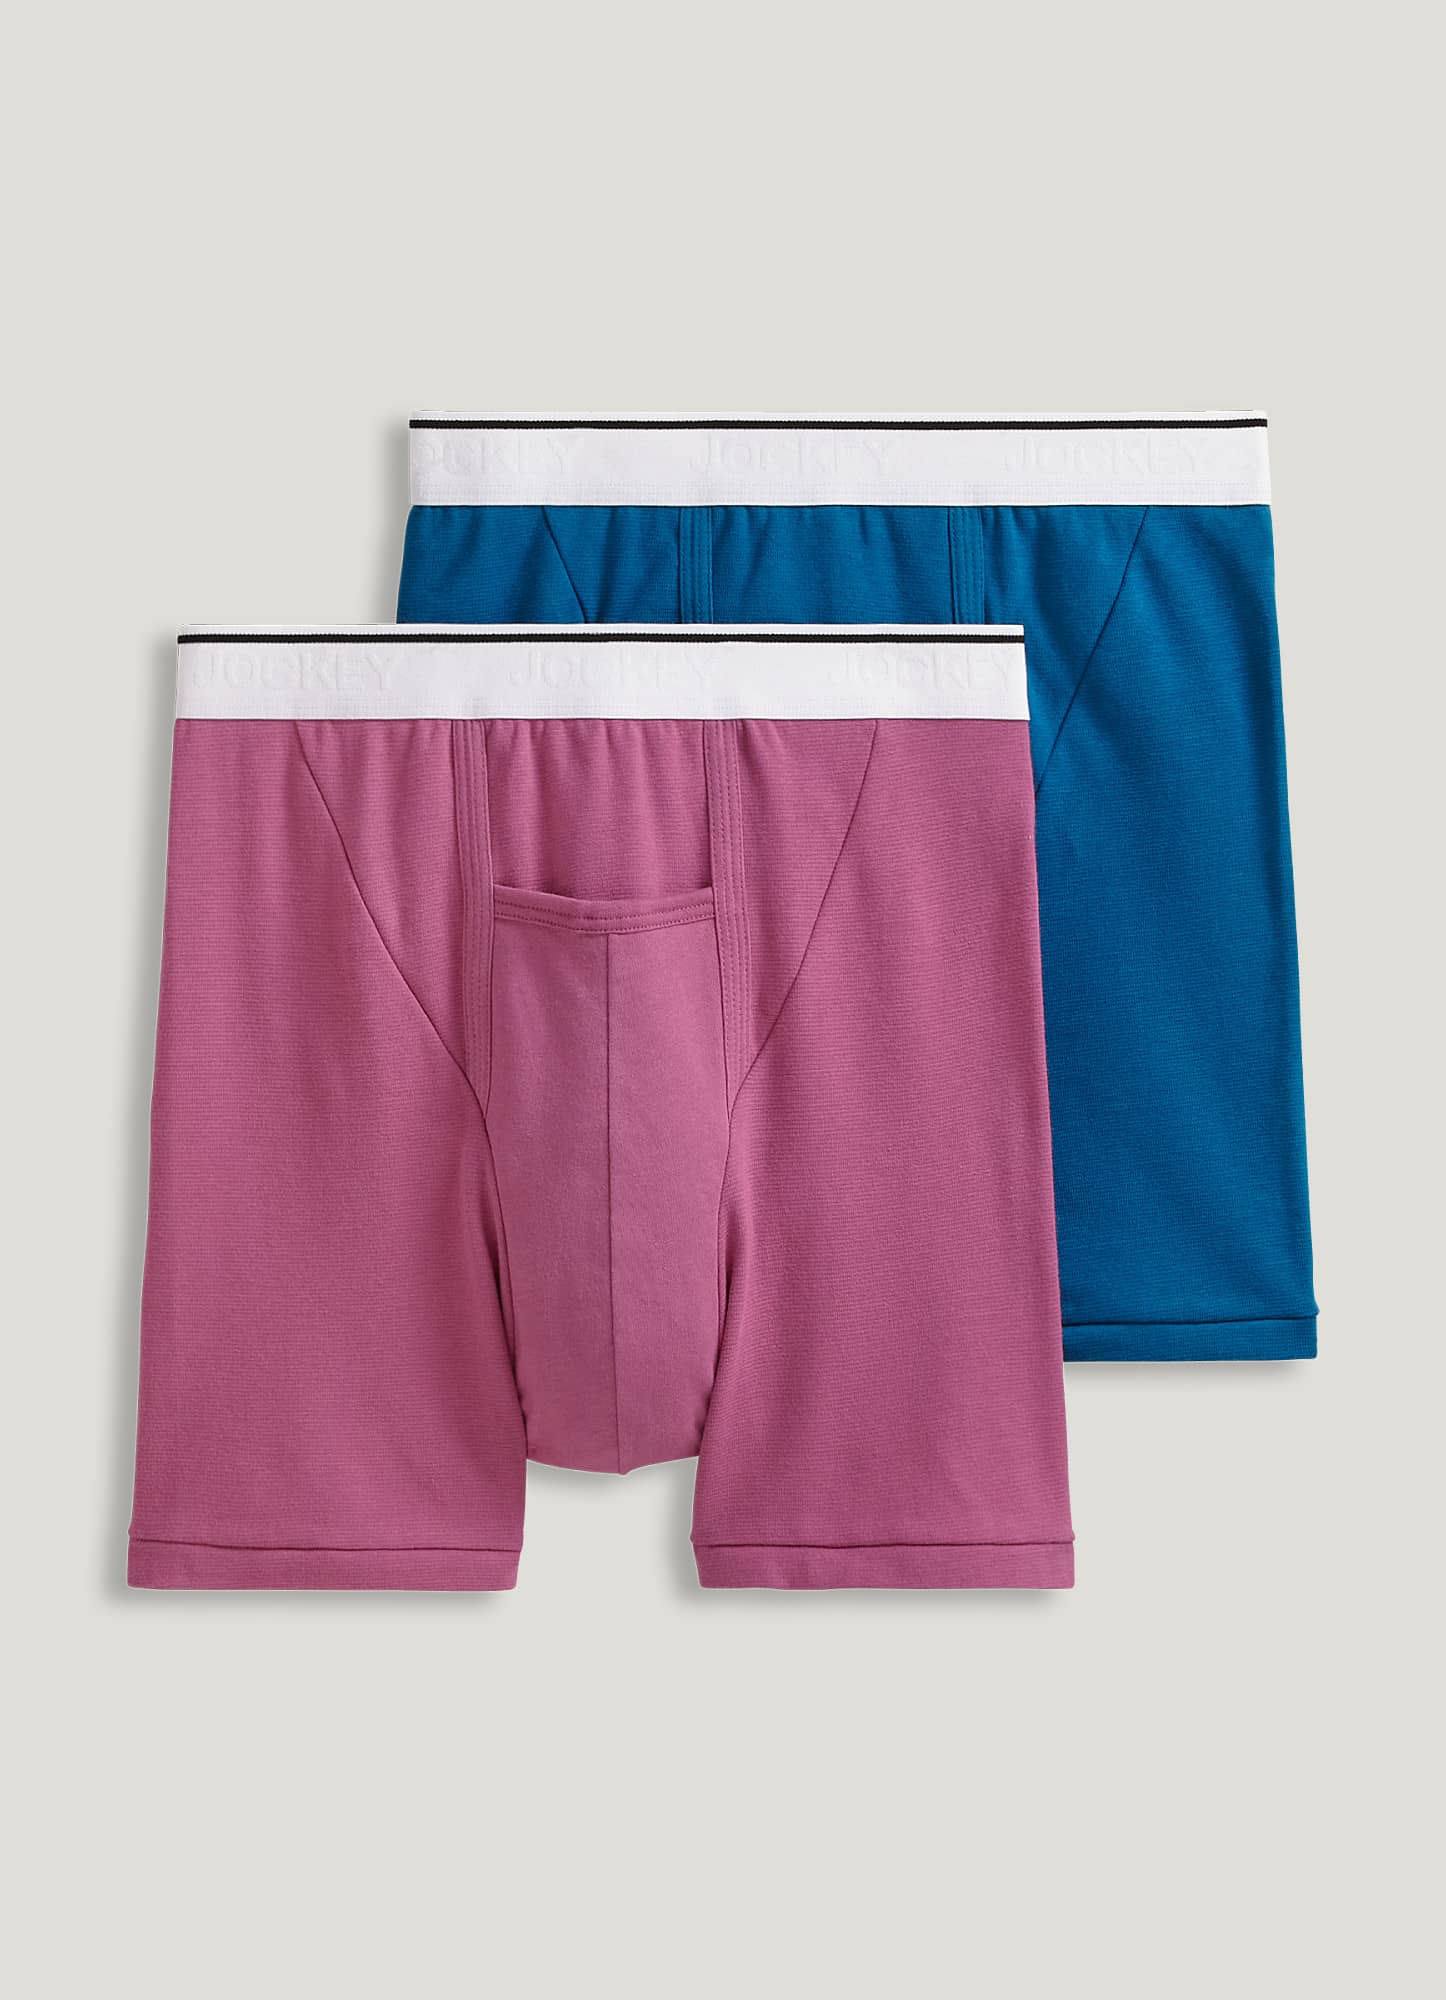 Jockey® Pouch 5 Boxer Brief - 2 Pack